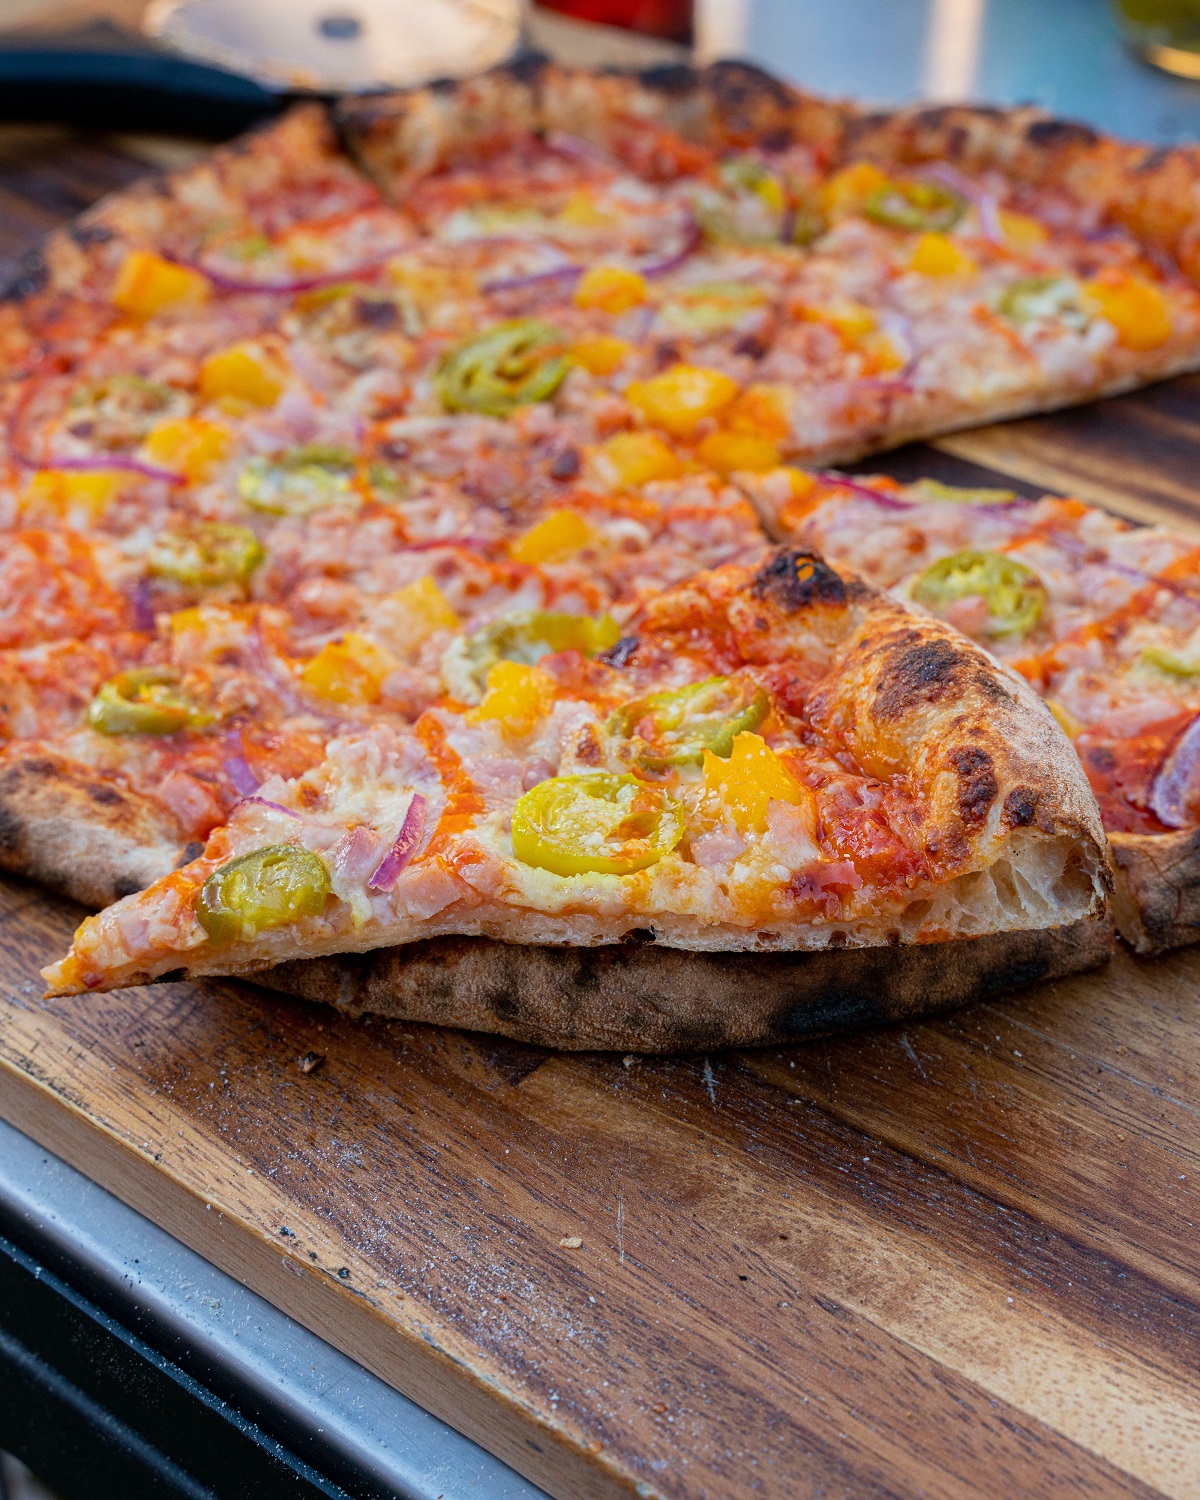 [oc] Would You Try A Sweet And Spicy Sourdough Pizza With Mangos?